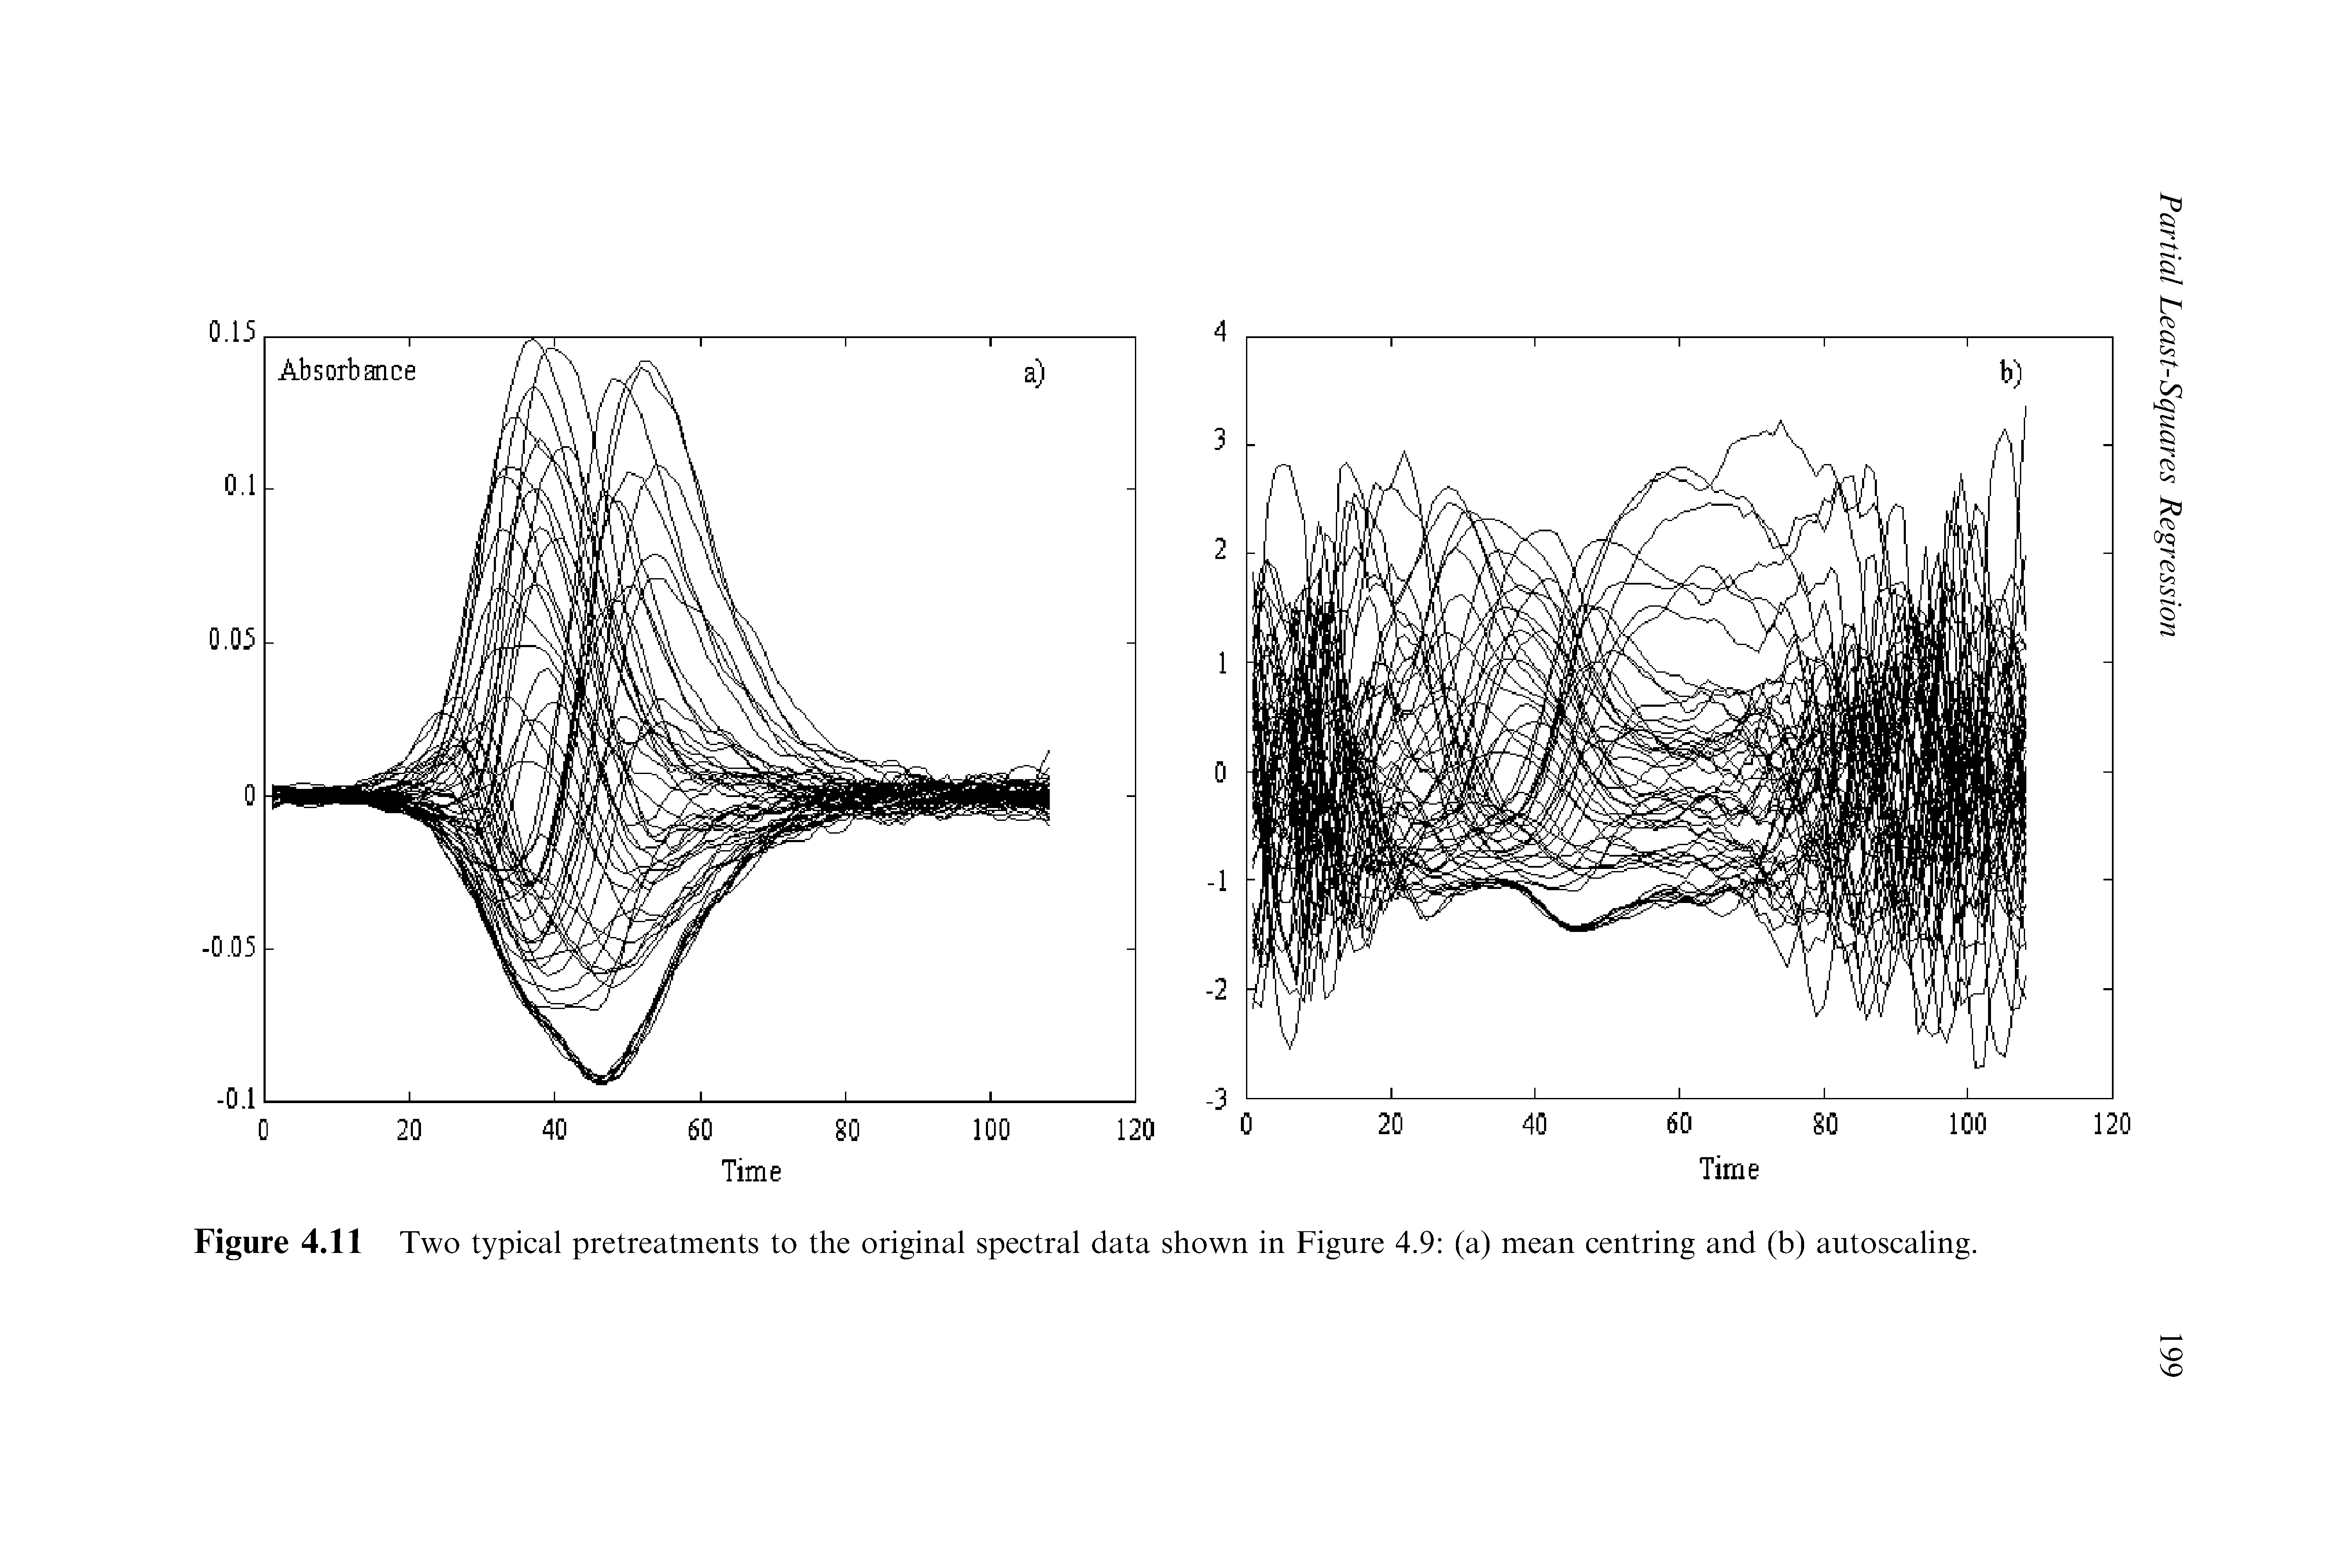 Figure 4.11 Two typical pretreatments to the original spectral data shown in Figure 4.9 (a) mean centring and (b) autoscaling.